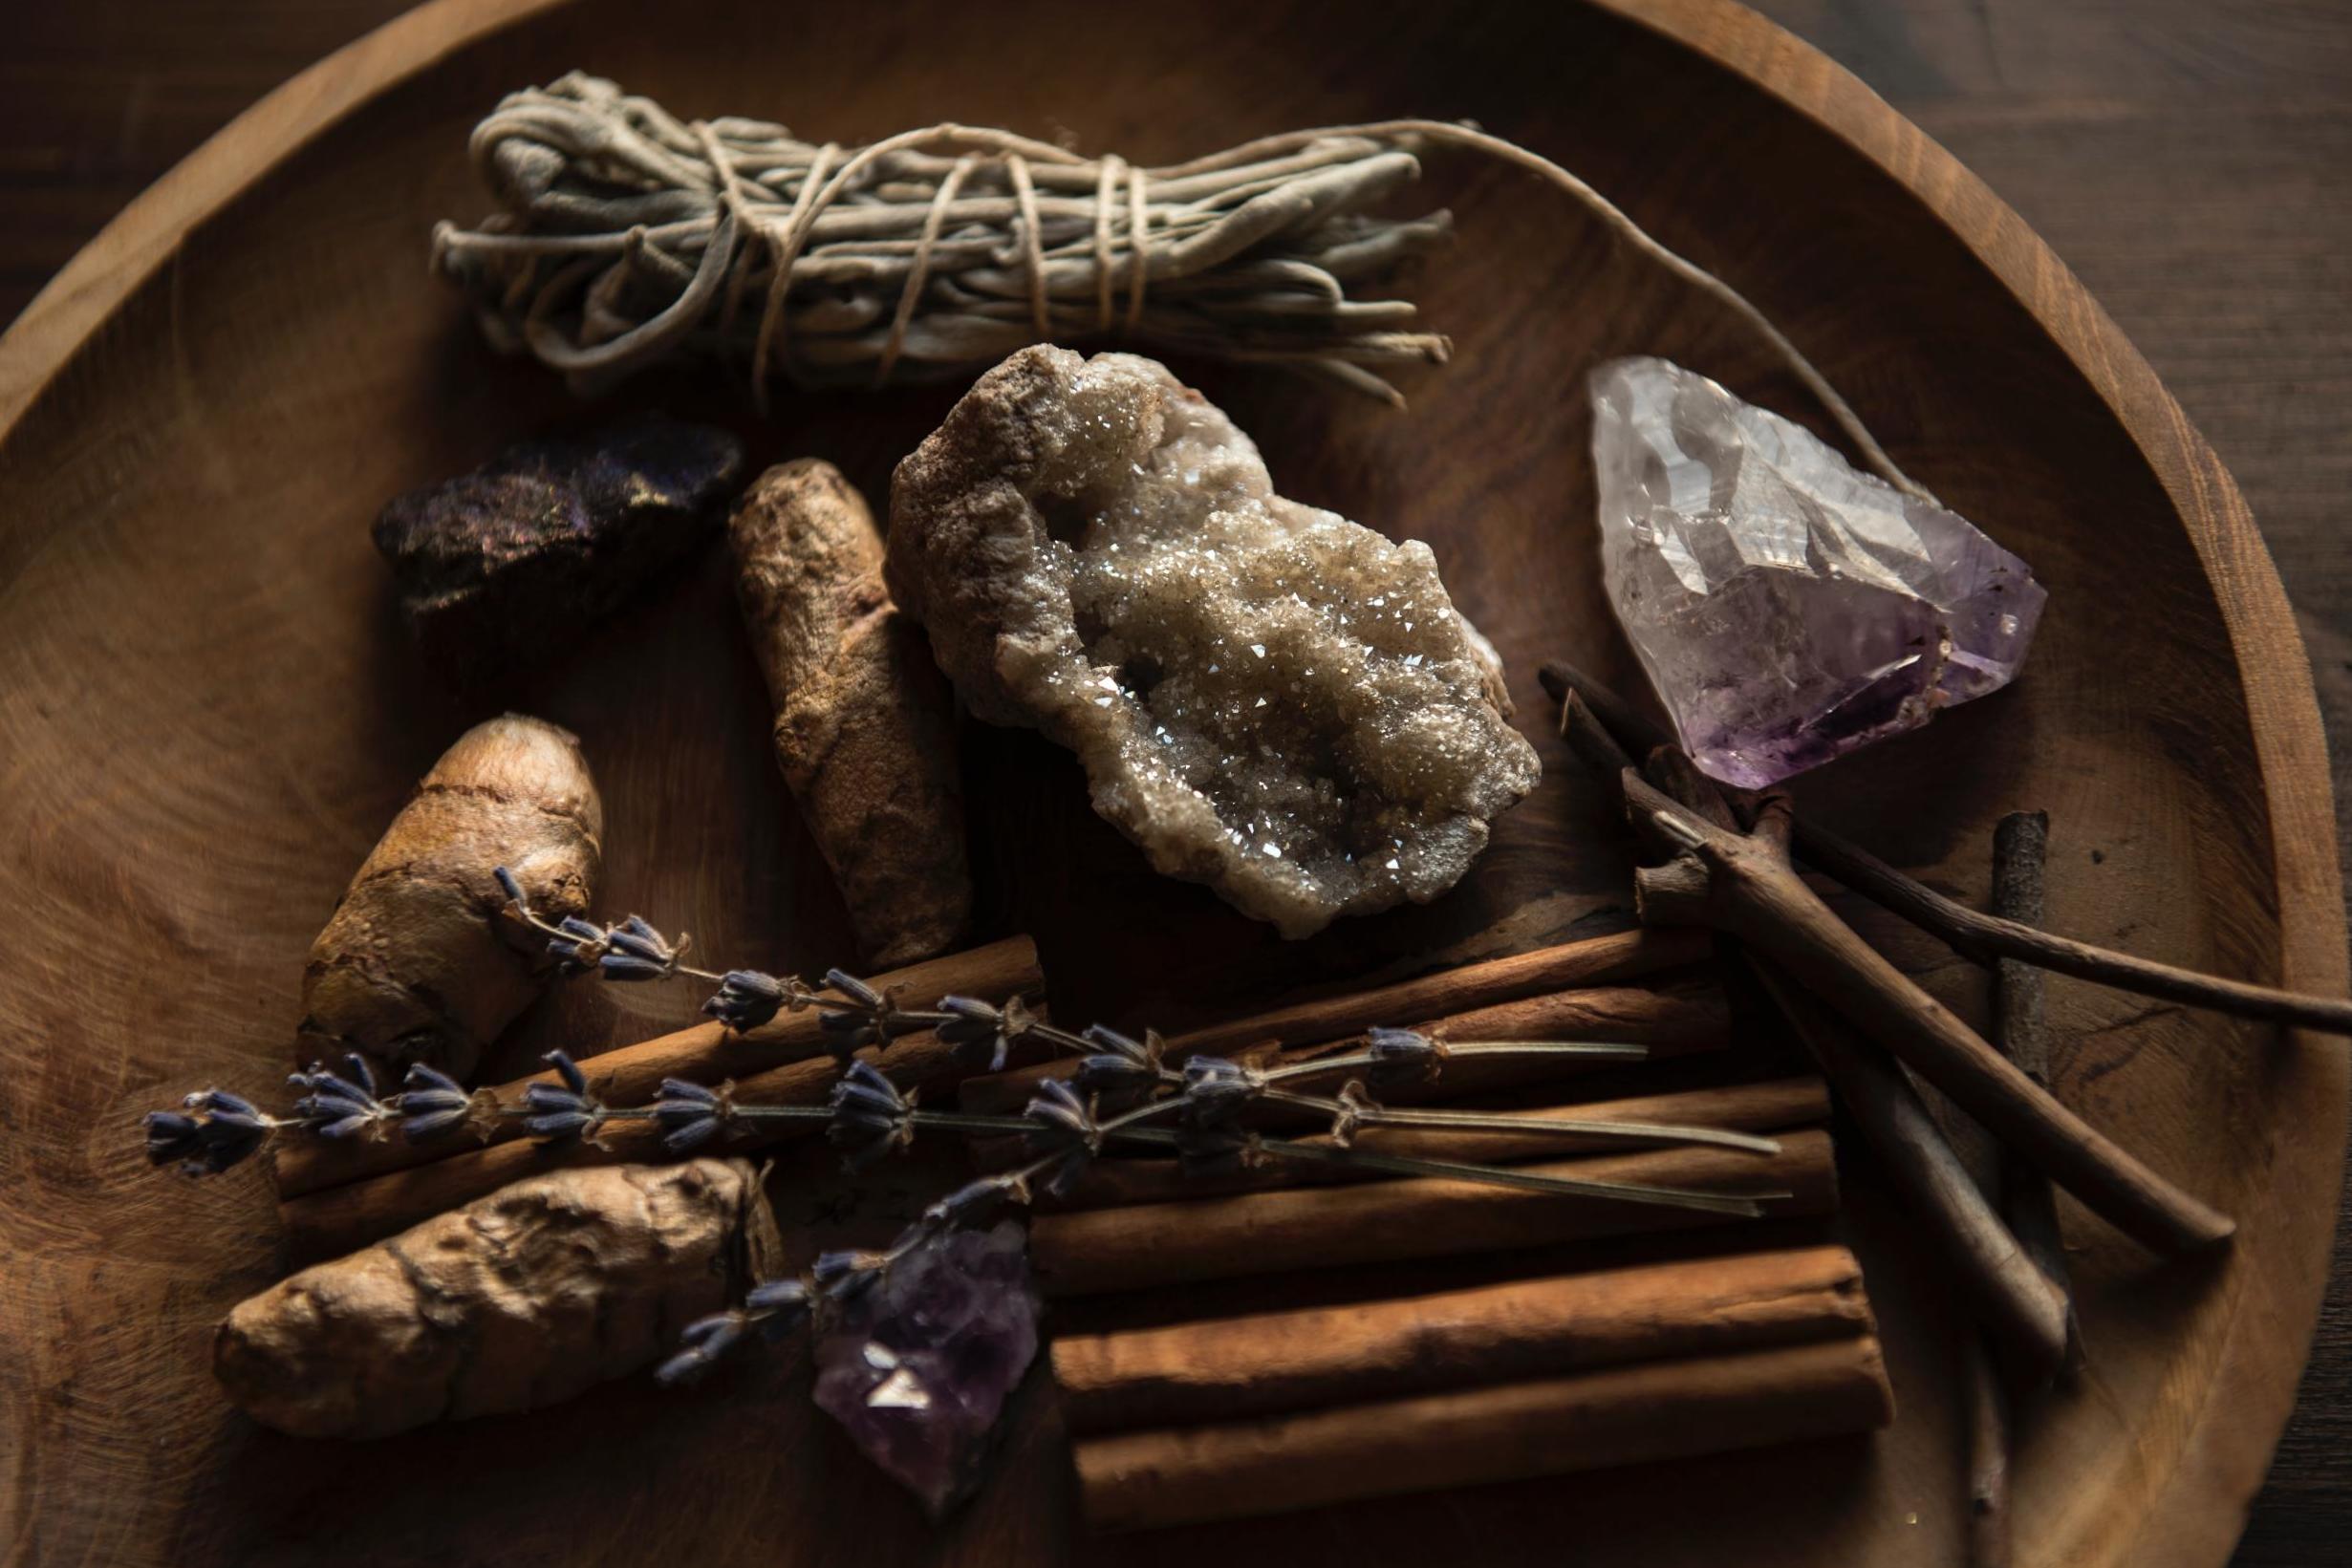 Witches collect objects that suggest earth, fire, air, water and spirit